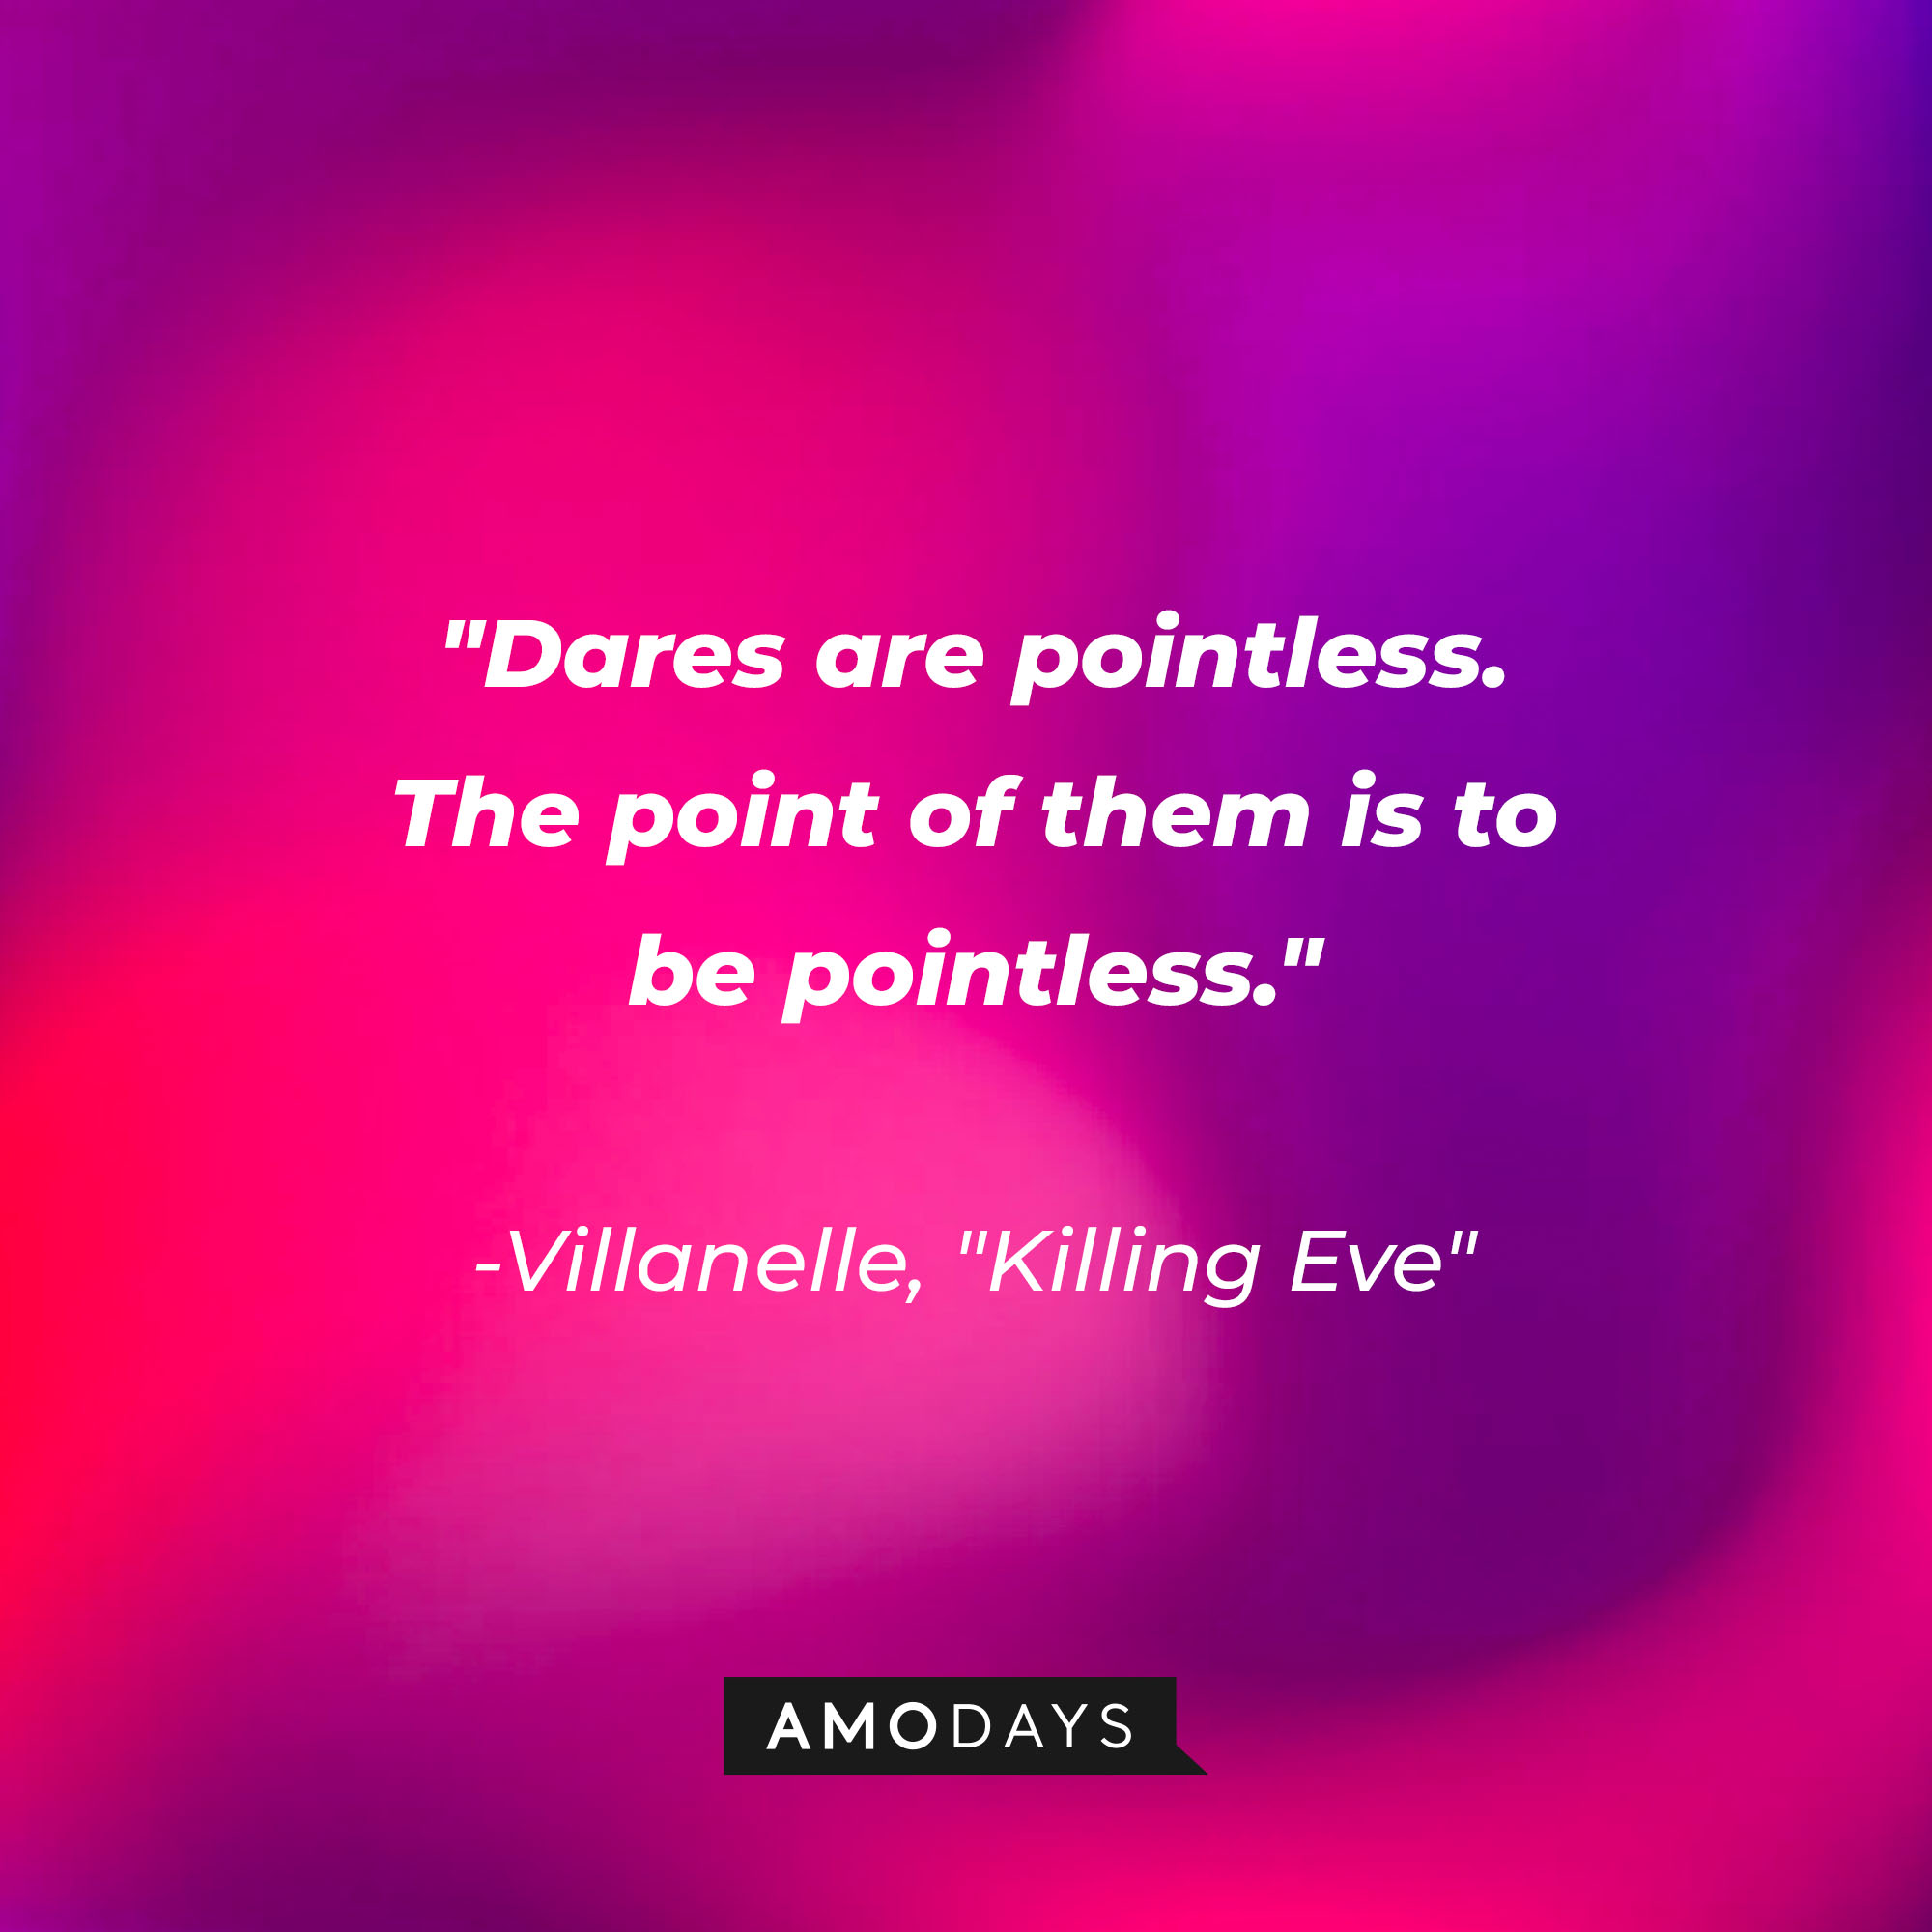 Villanelle's quote: "Dares are pointless. The point of them is to be pointless." | Source: Amodays